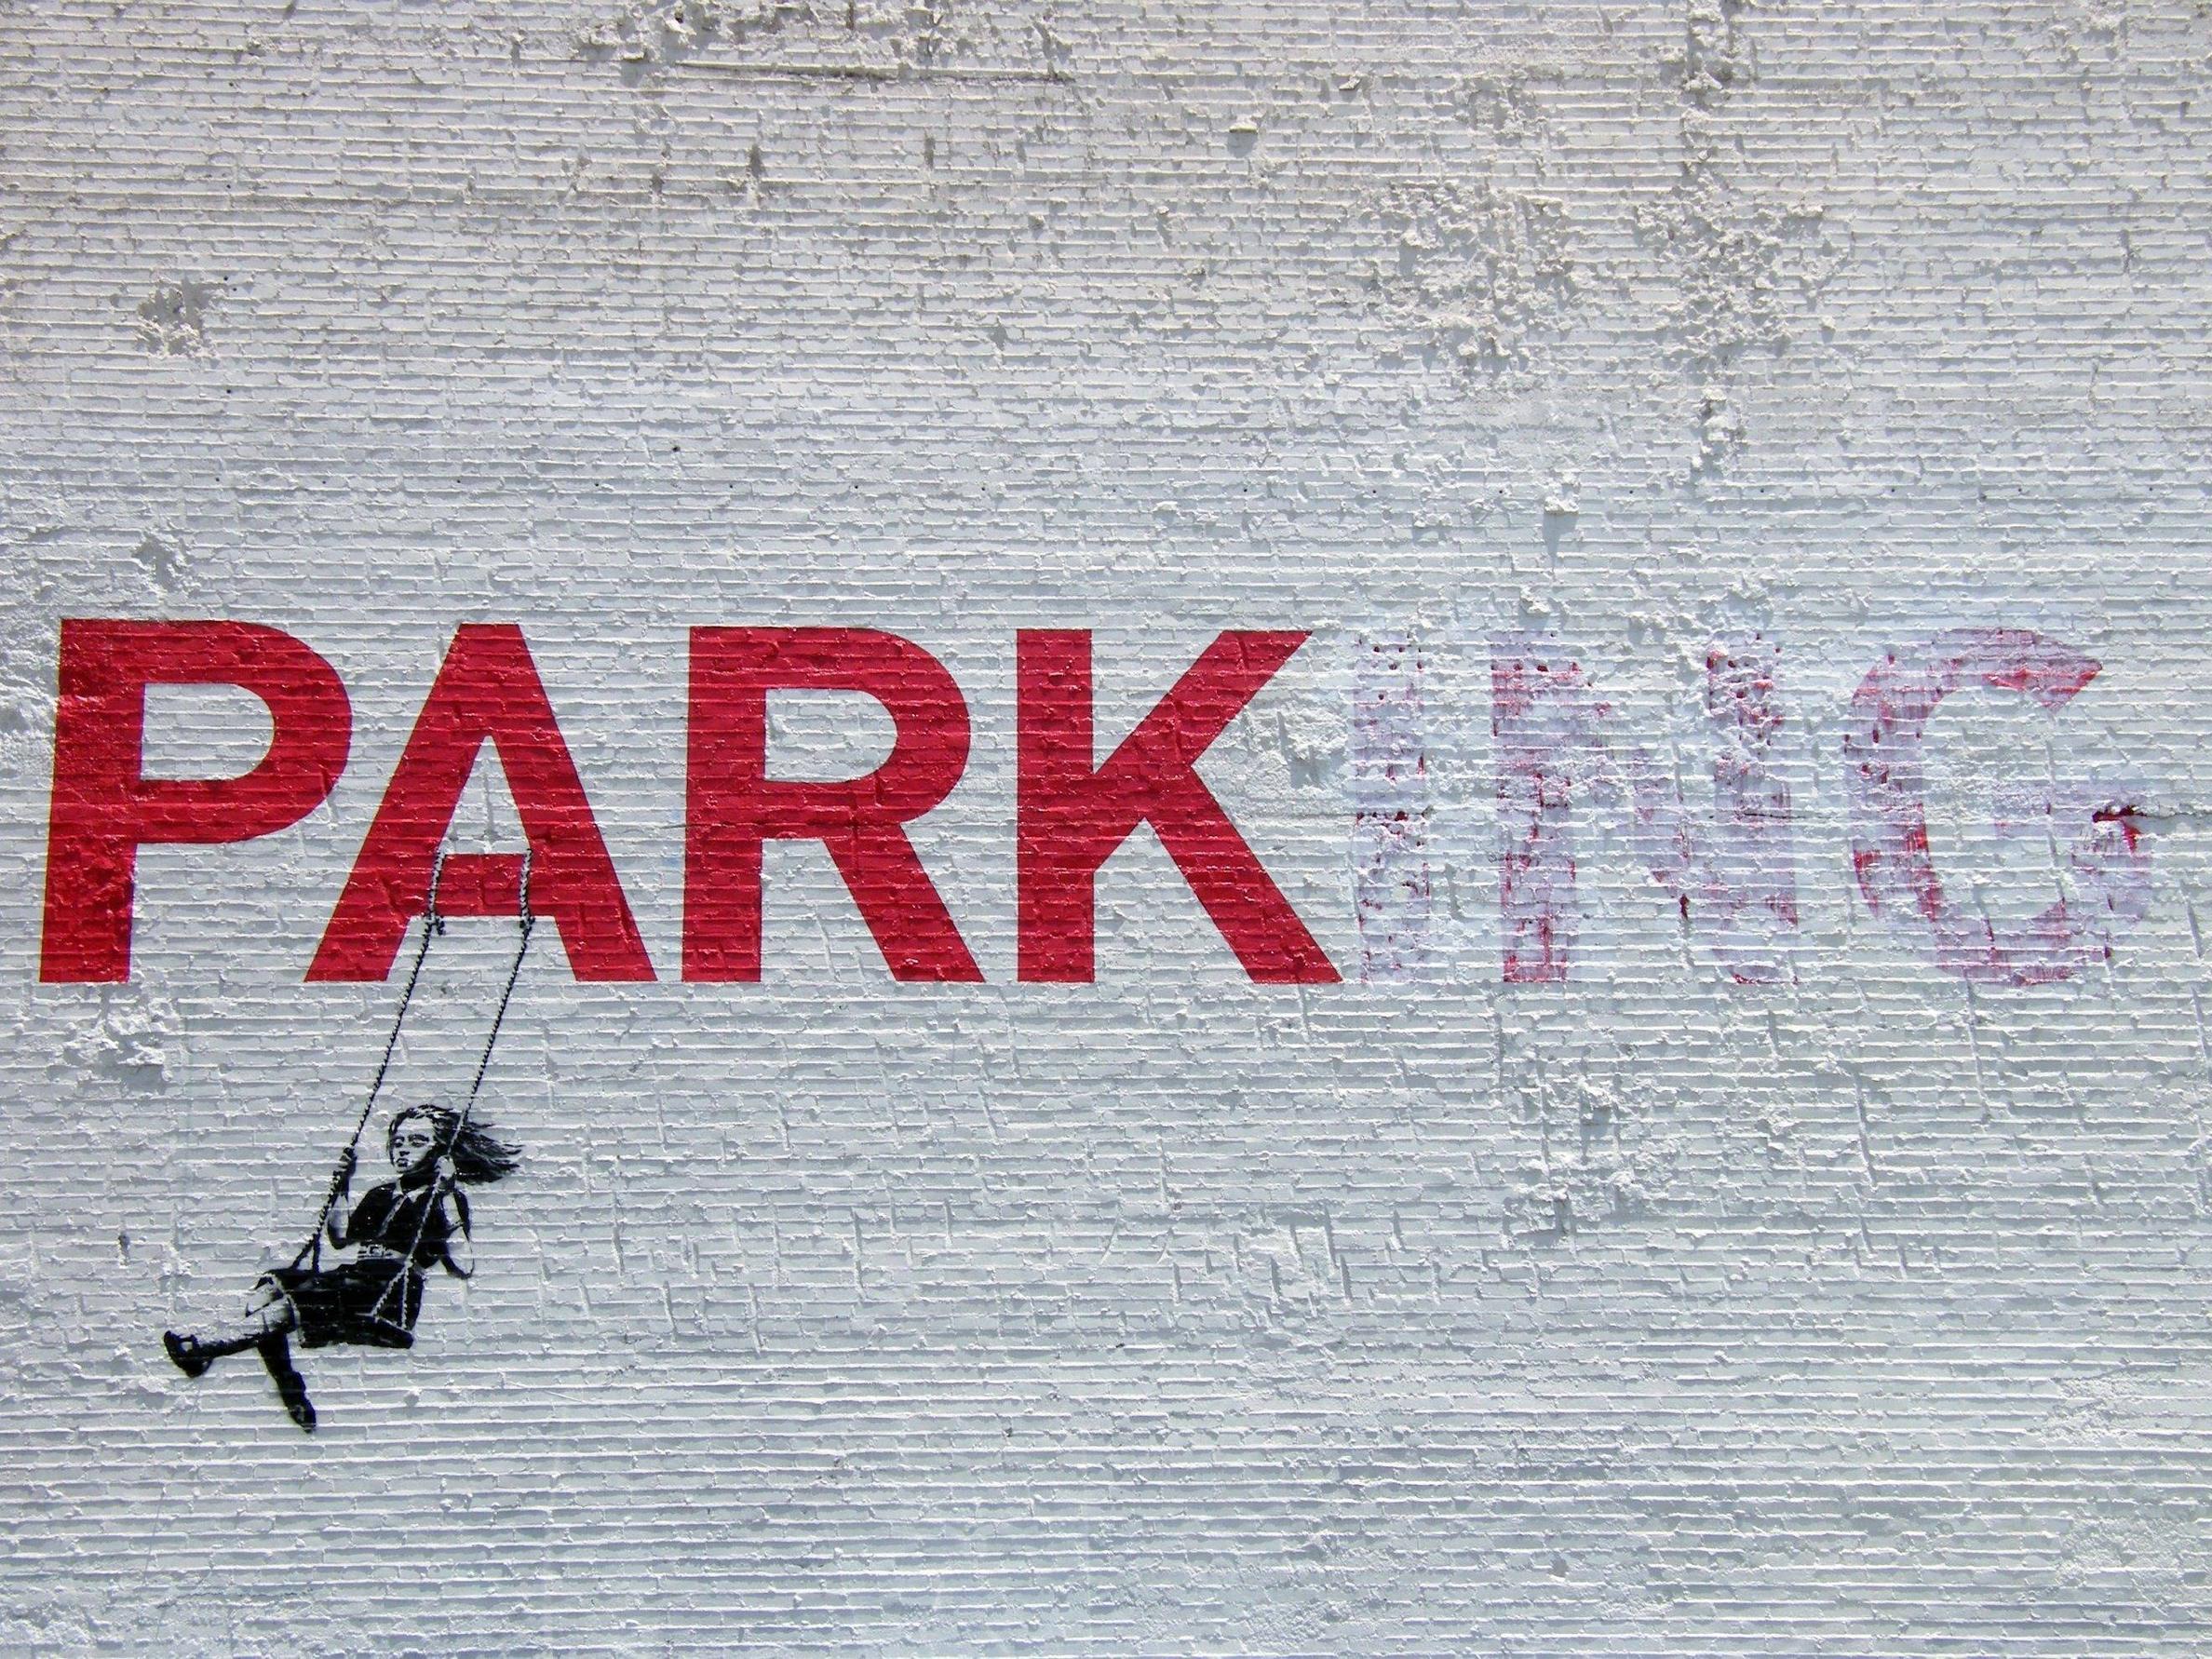 Graffiti, the park, the artist Banksy wallpaper and image